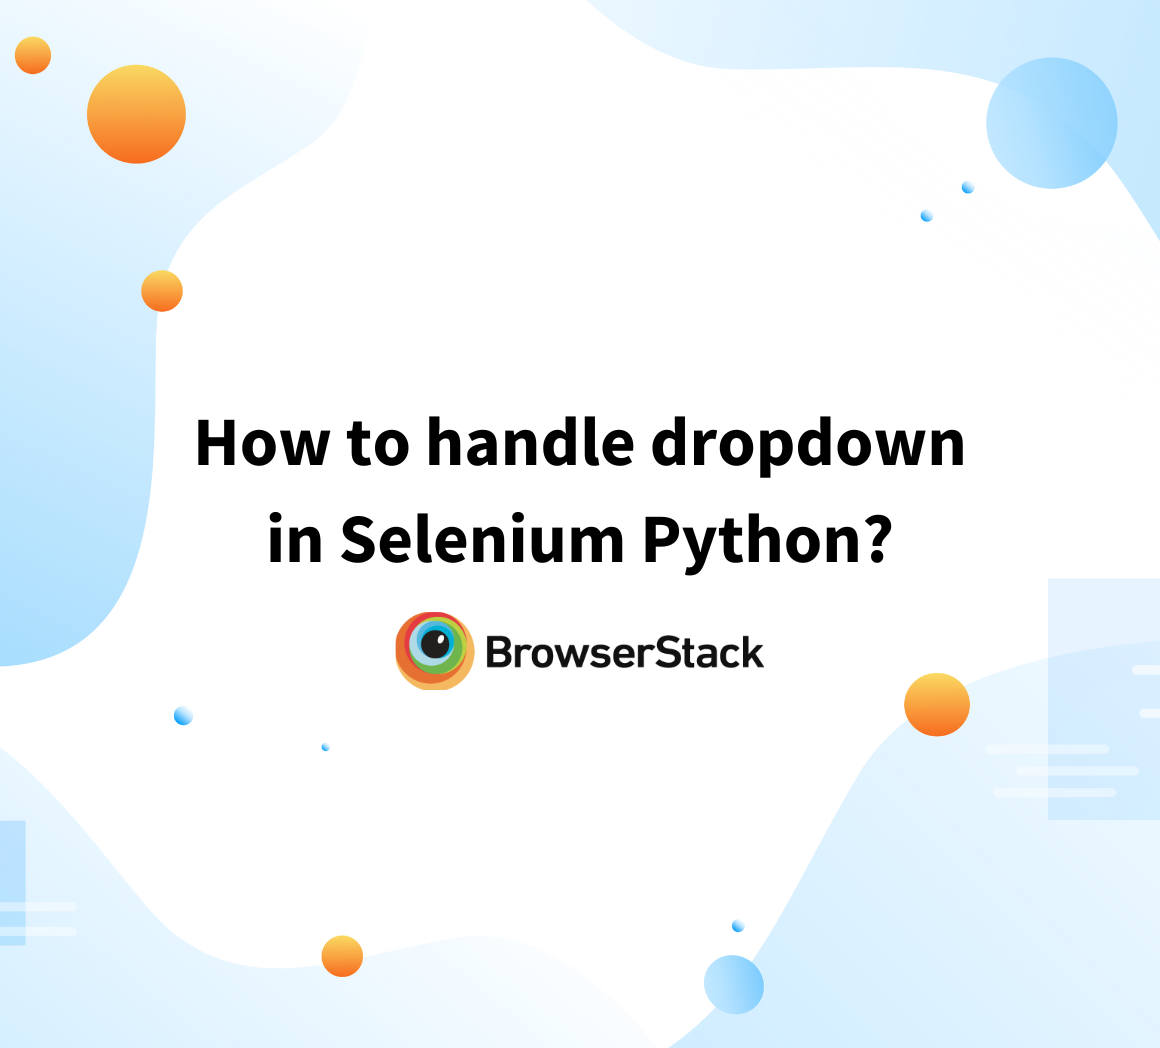 How to handle dropdown in Selenium Python